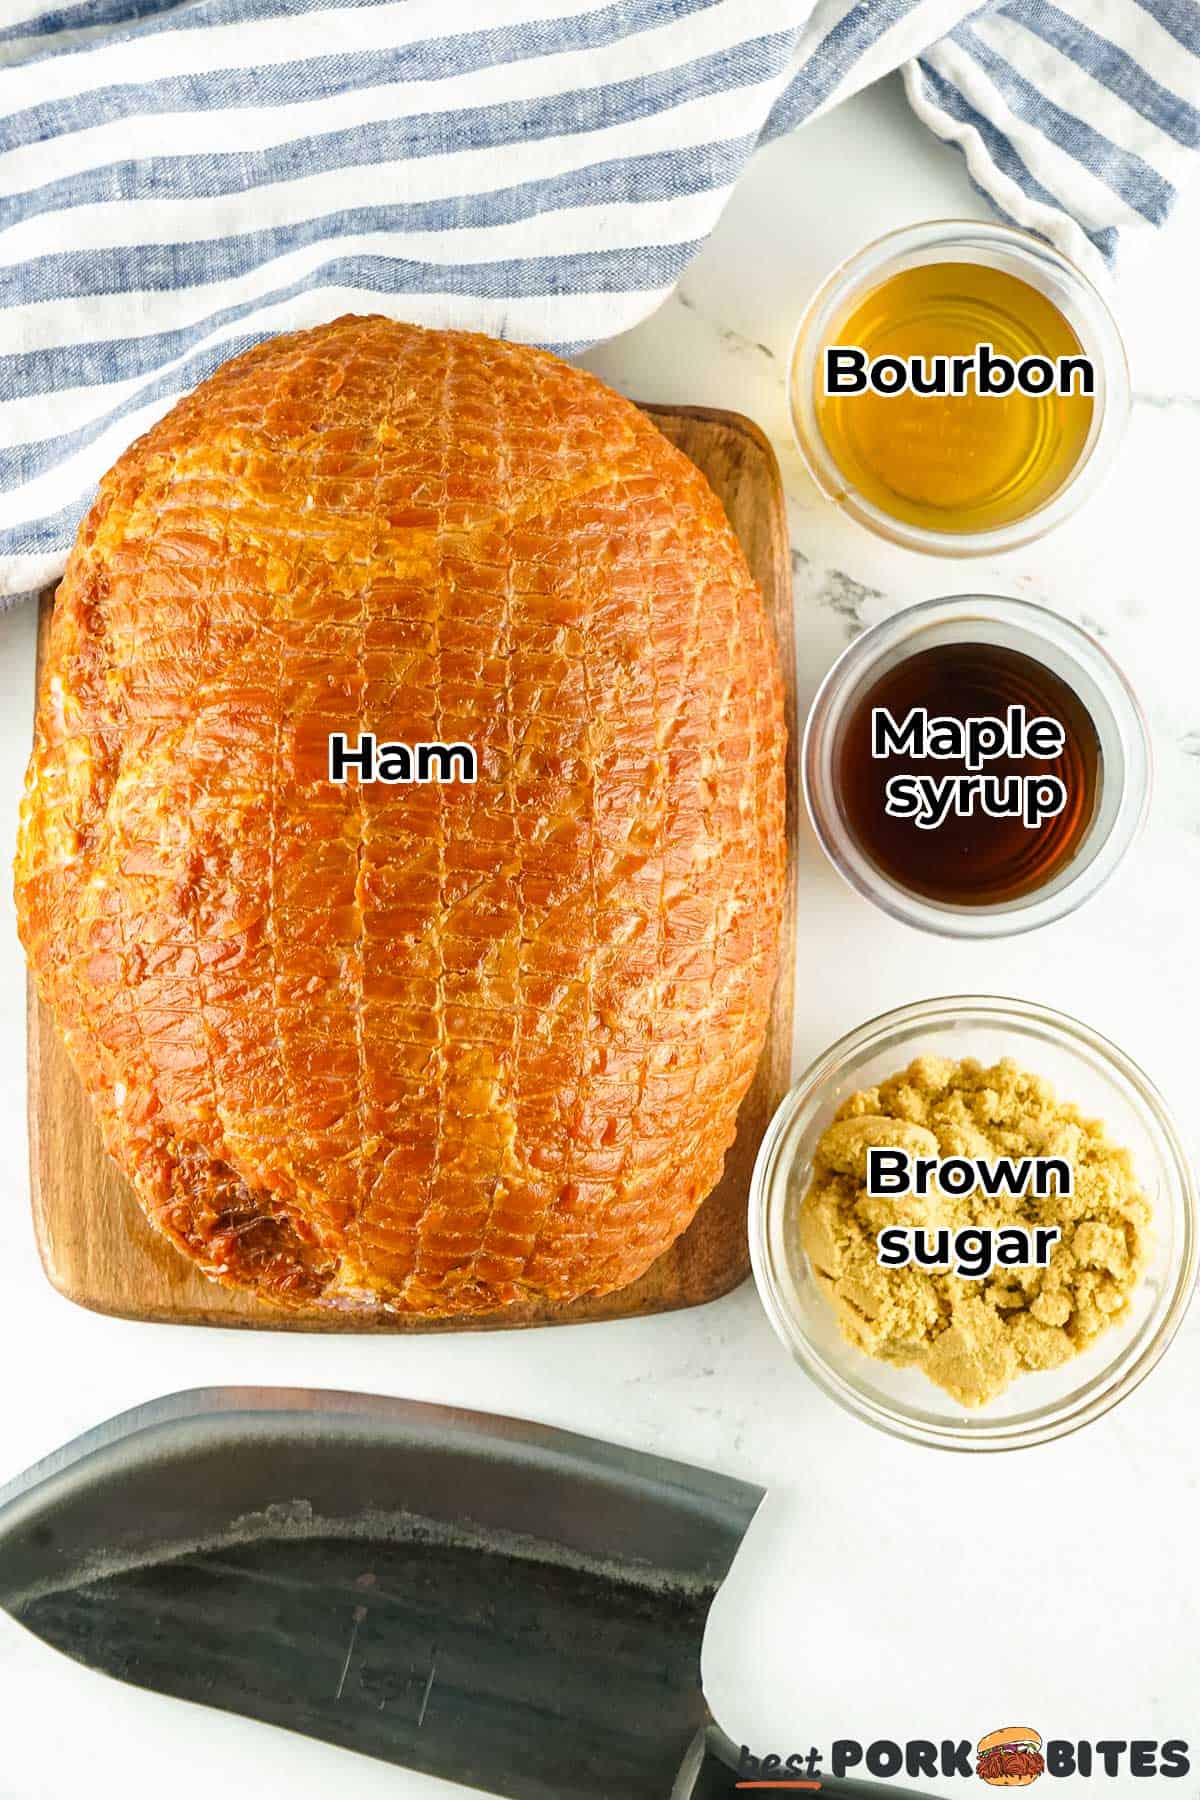 the ingredients for smoked ham in separate bowls with labels on a counter with a towel and a knife